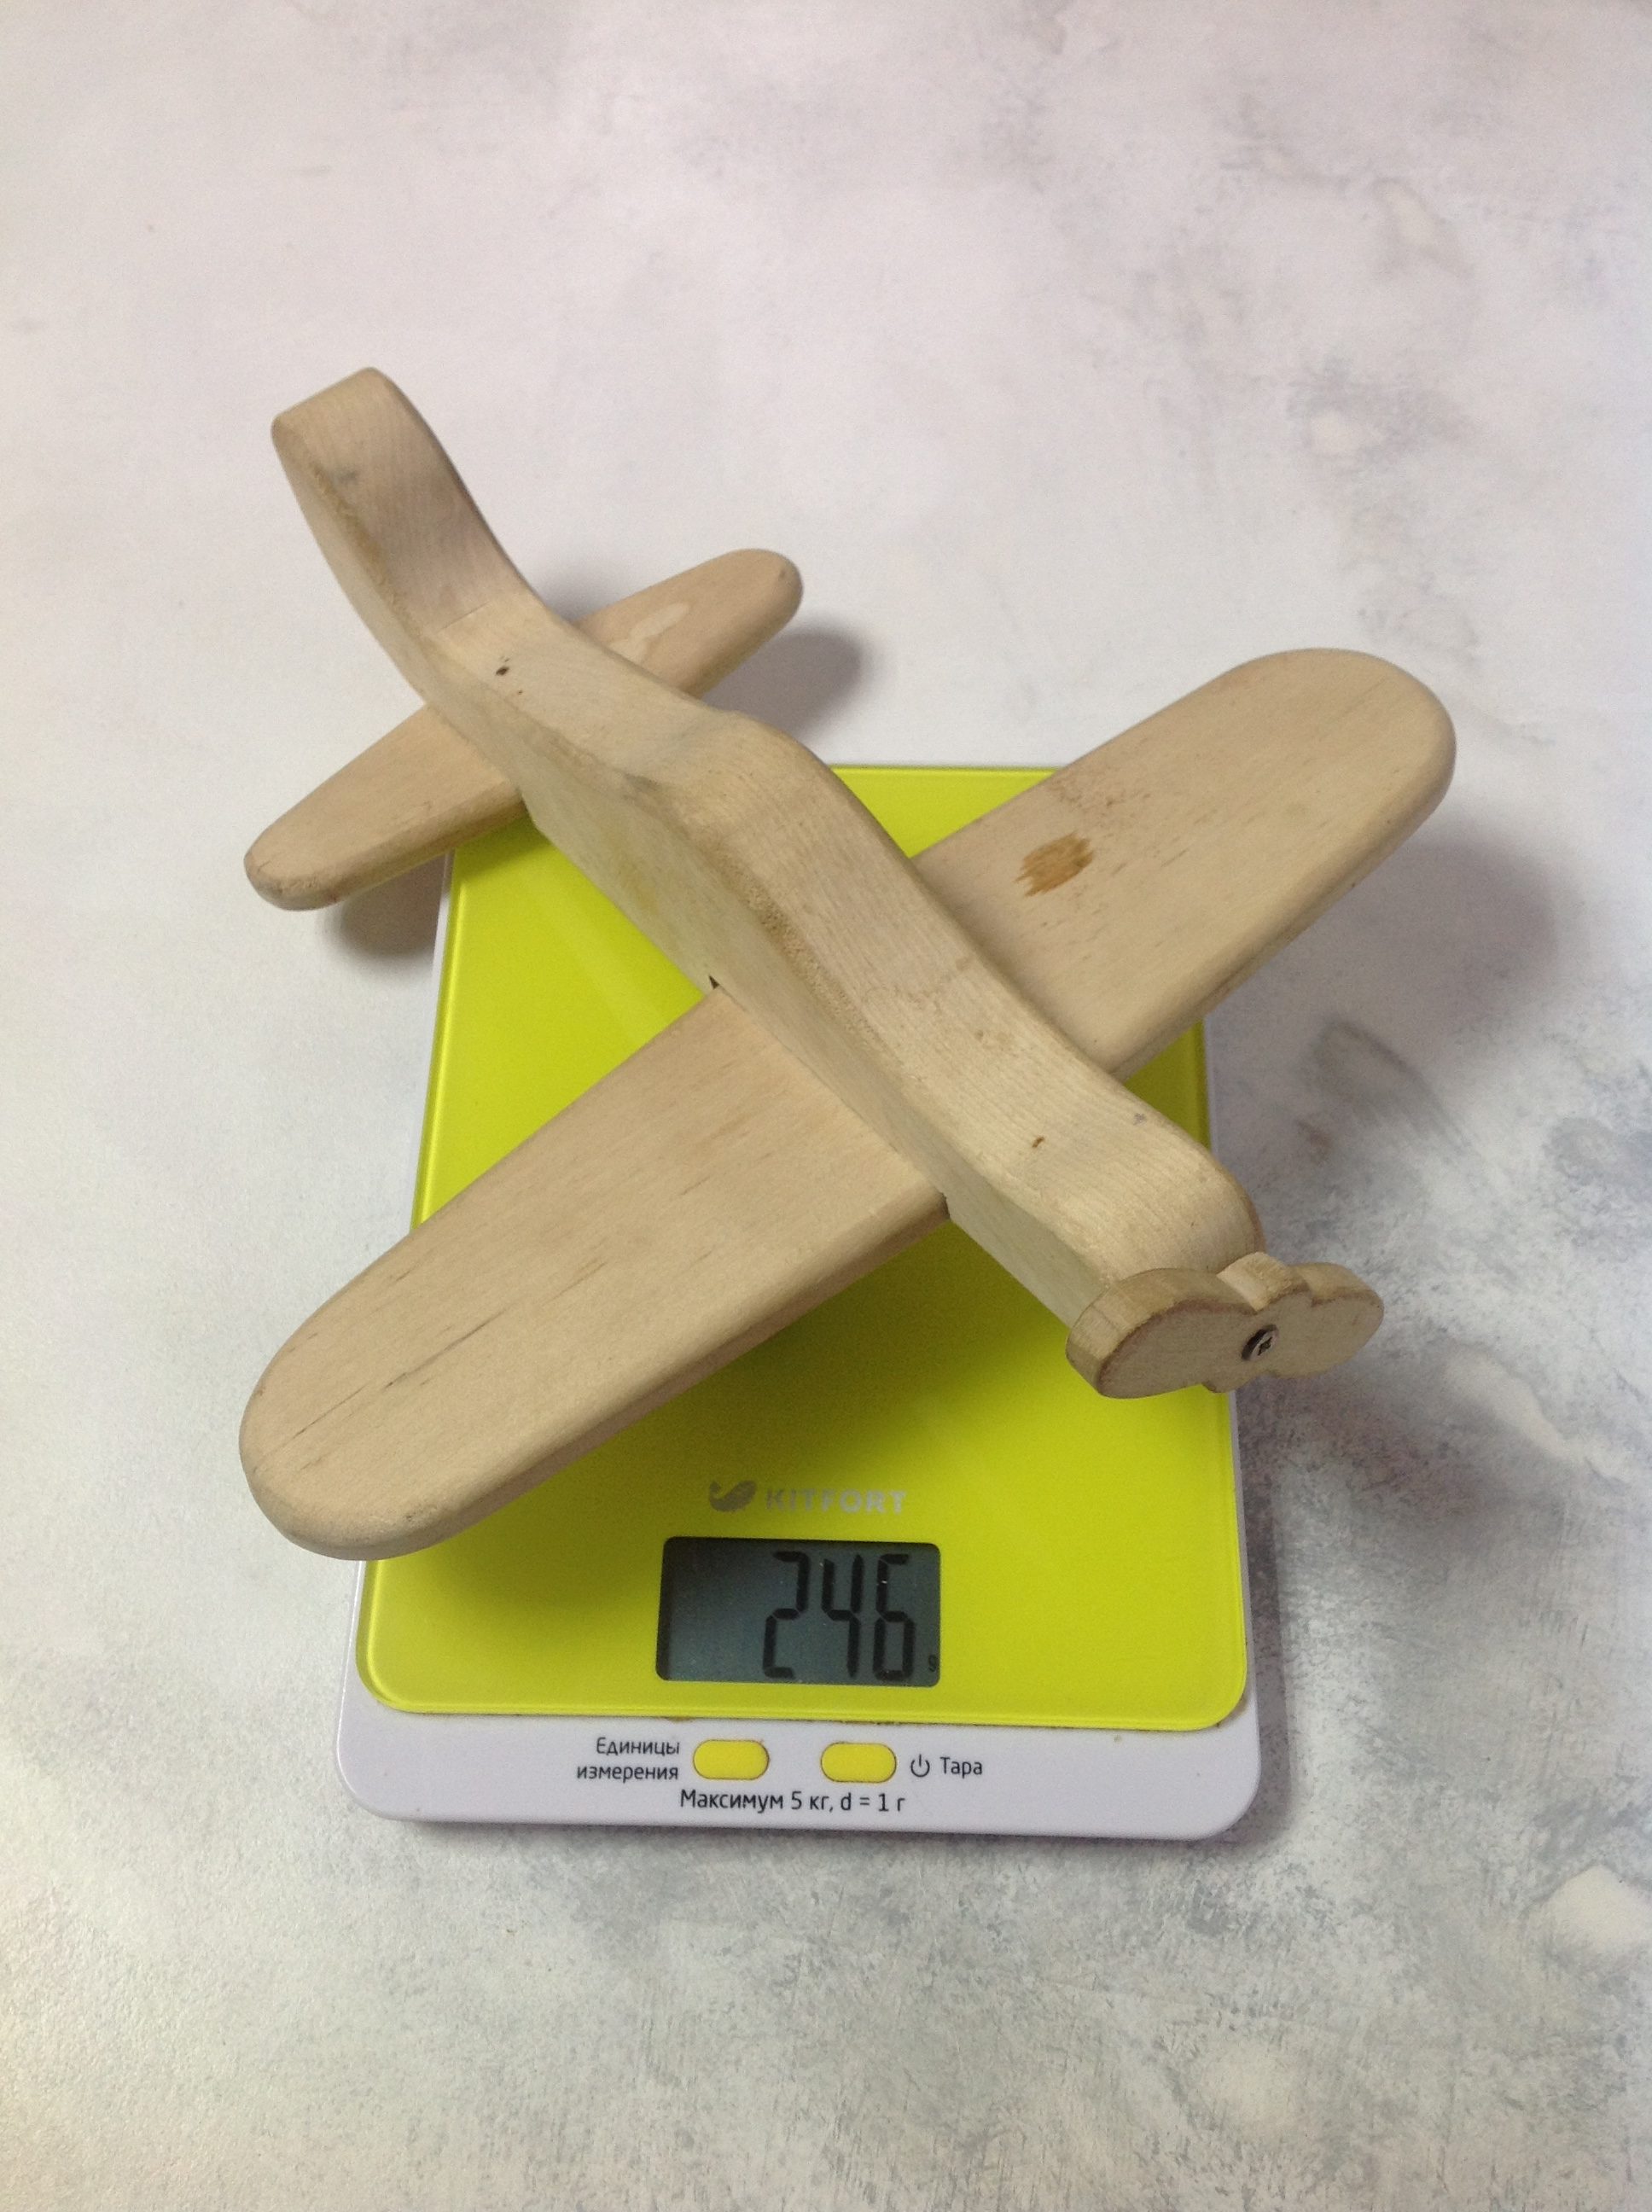 How much does the wooden toy plane weigh?